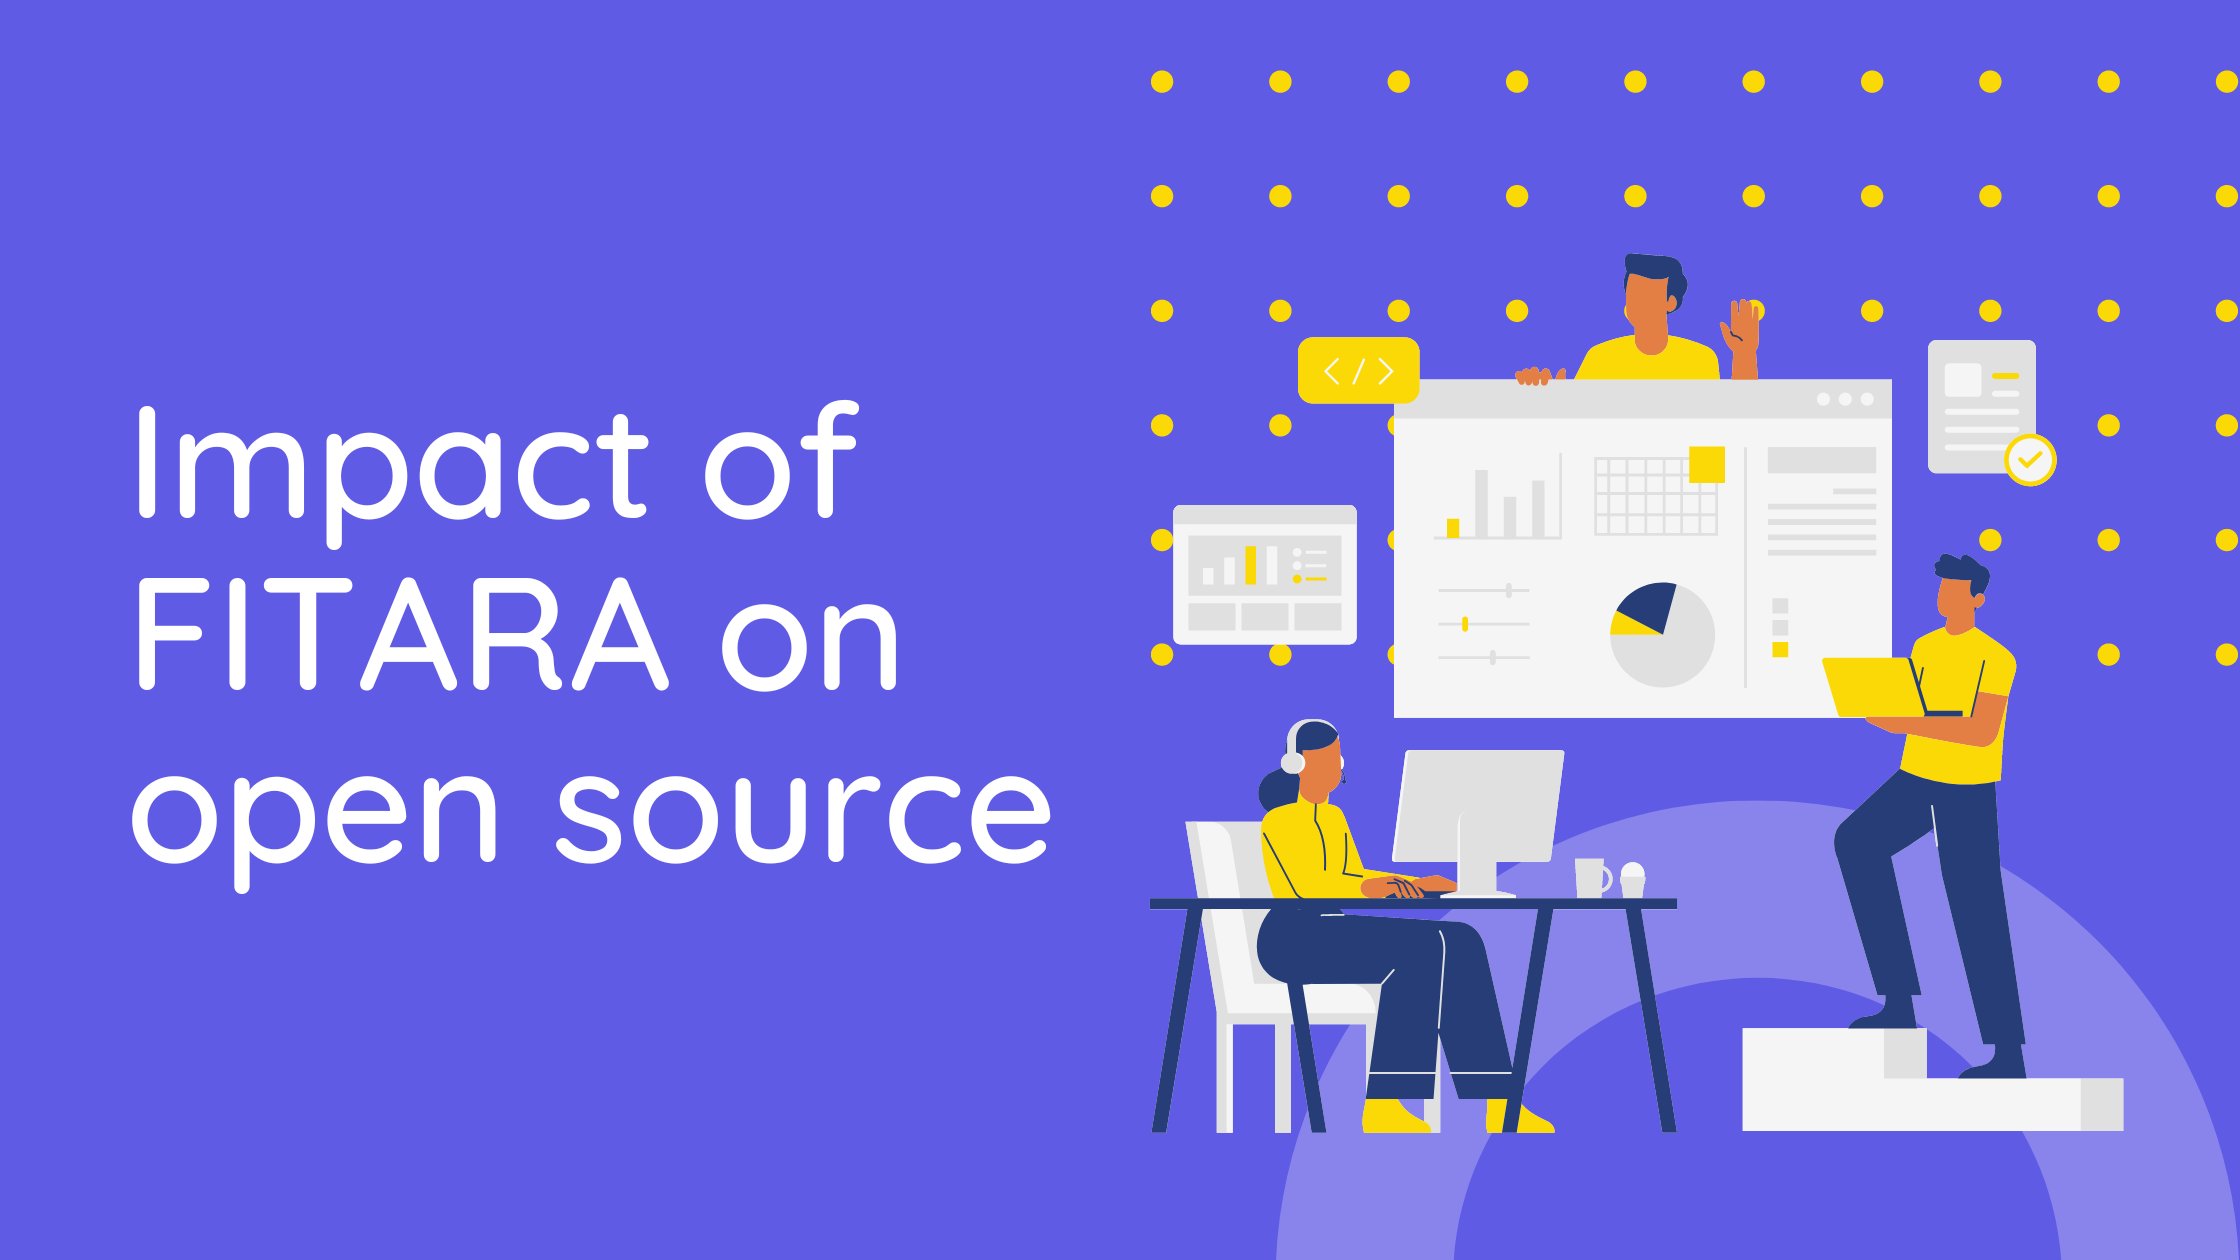 The impact of FITARA on open source adoption in the Public Sector